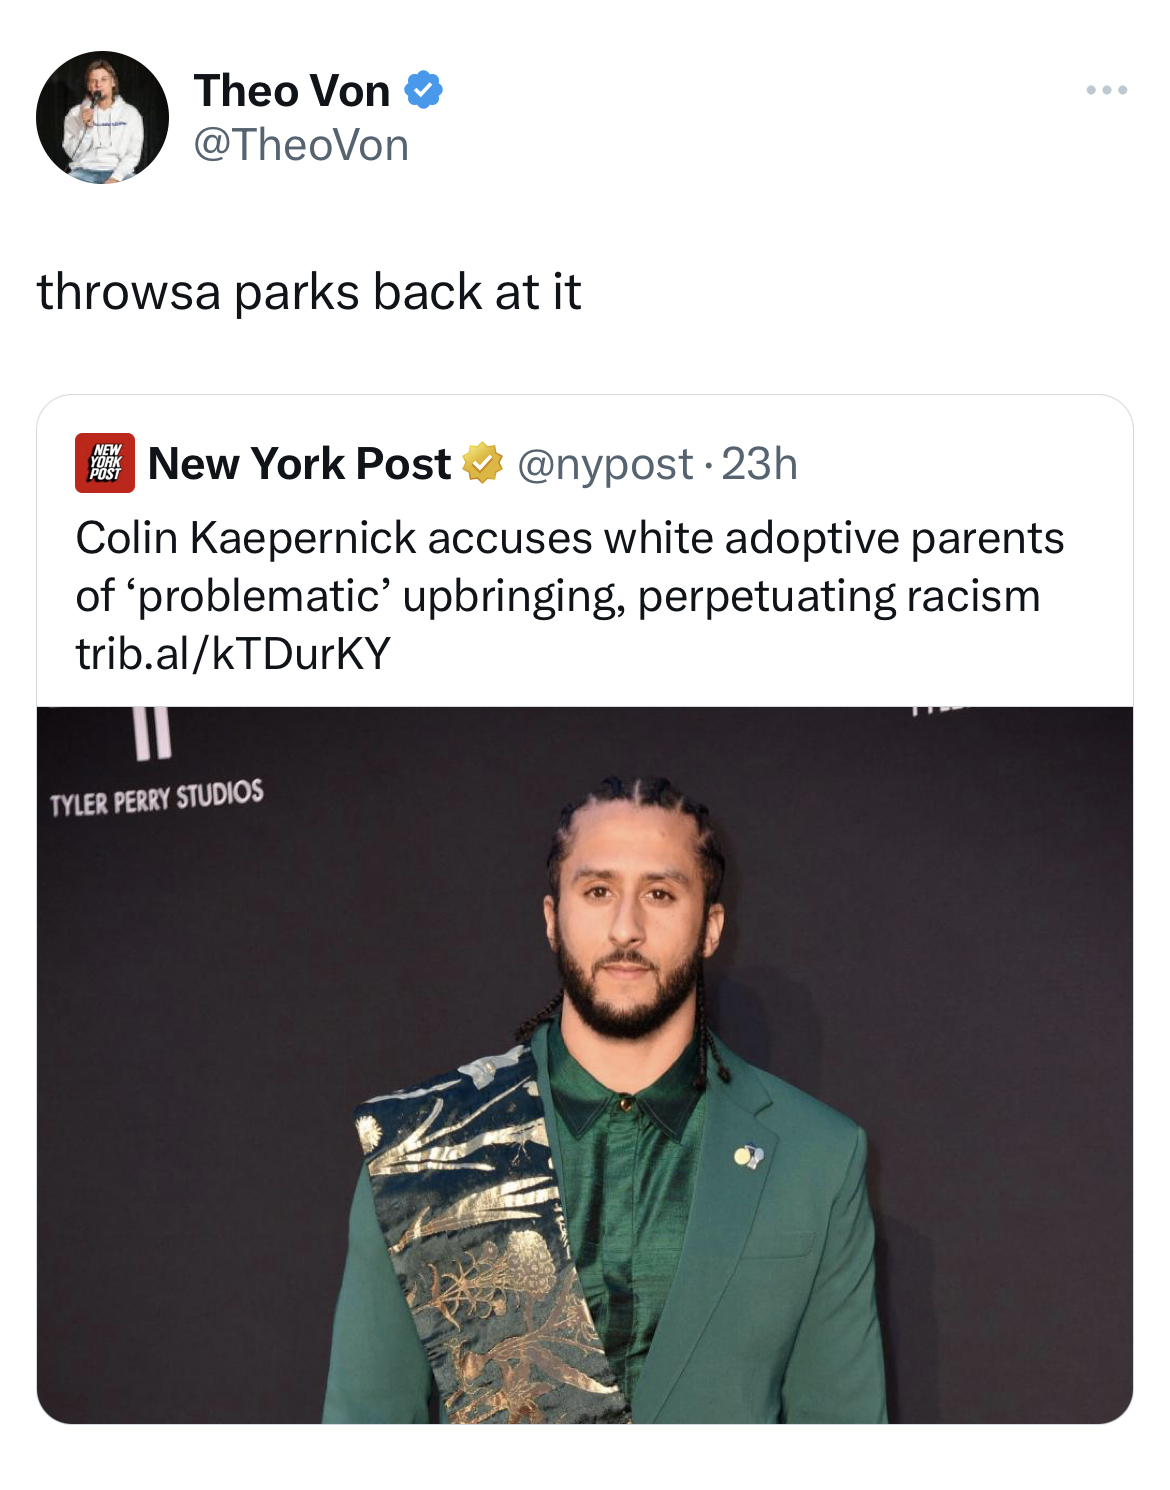 savage tweets roasting celebs - media - Theo Von throwsa parks back at it New York Post Colin Kaepernick accuses white adoptive parents of 'problematic' upbringing, perpetuating racism trib.alkTDurKY Tyler Perry Studios